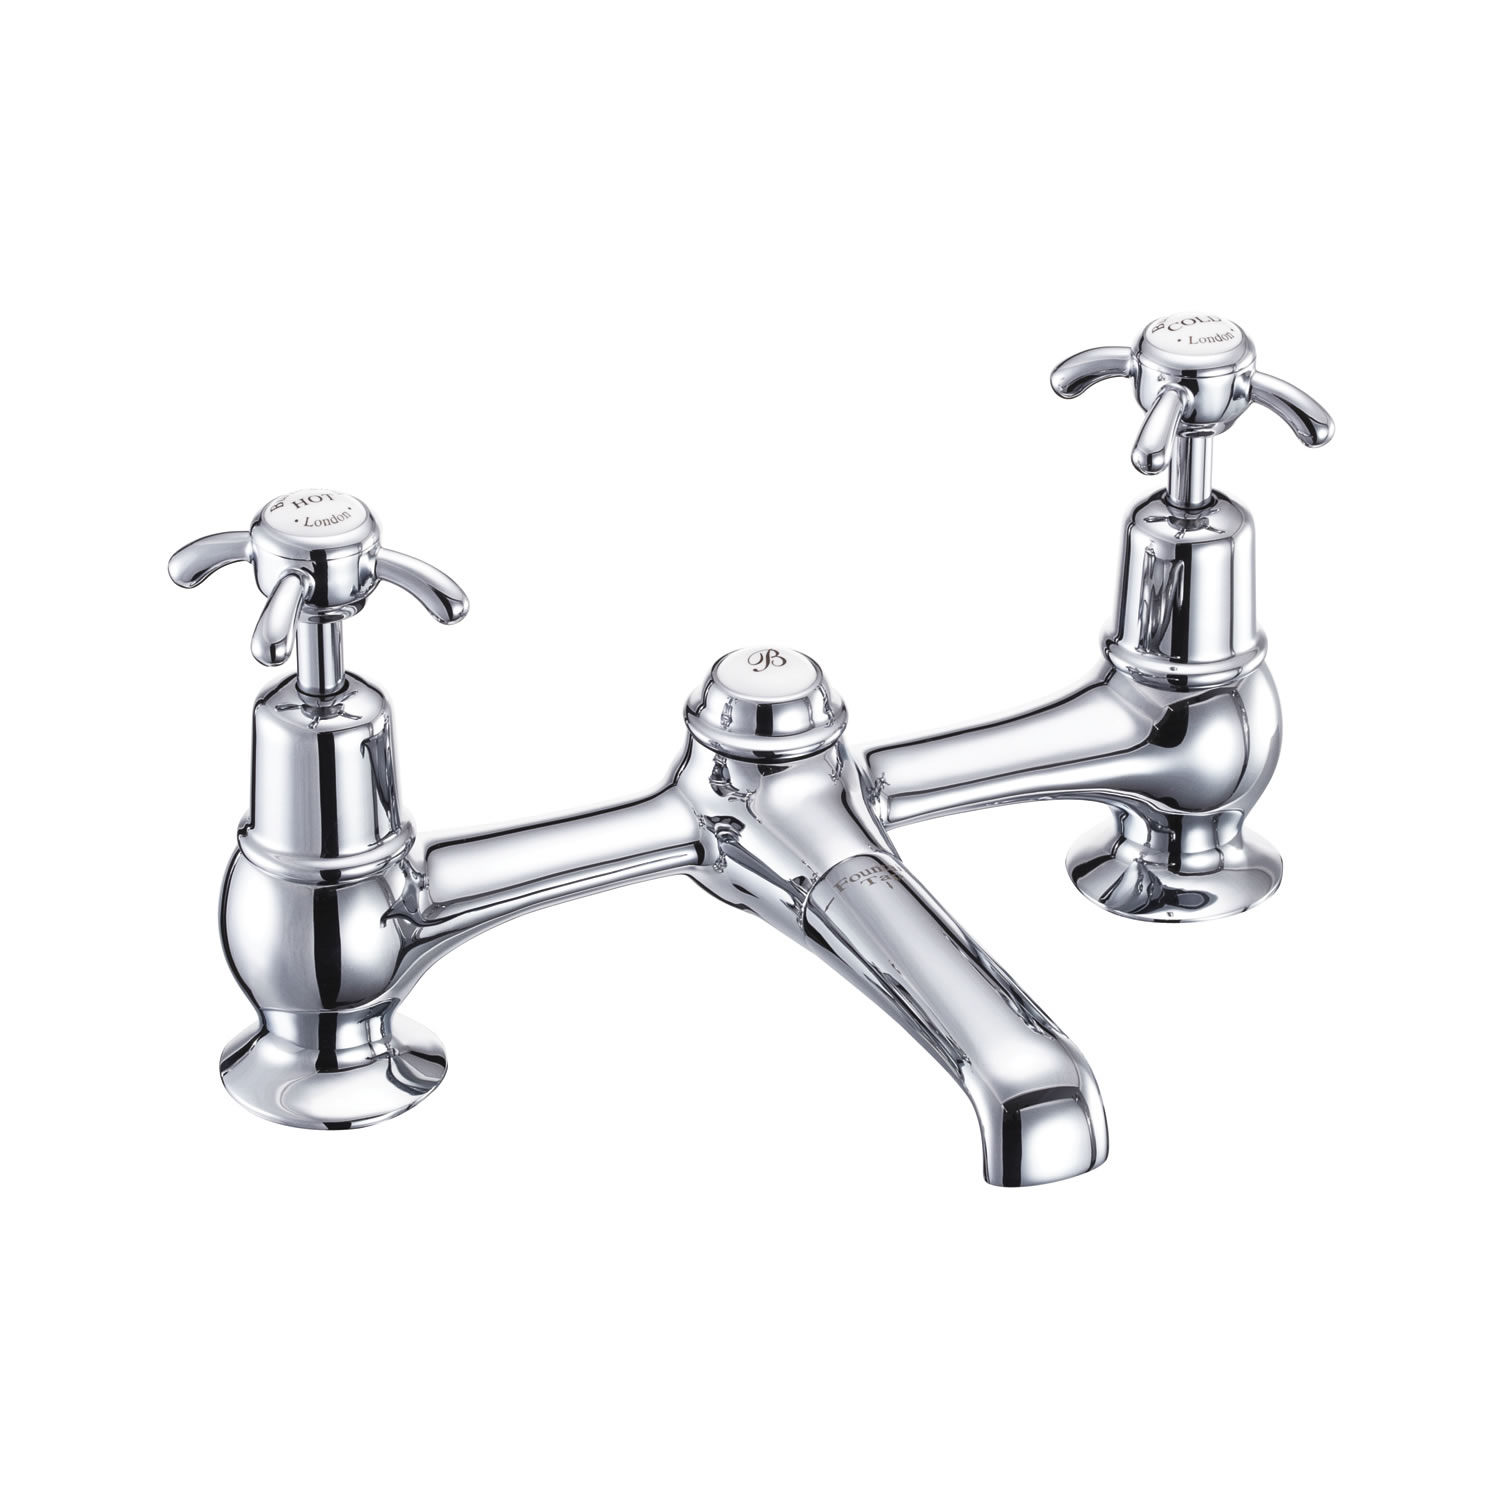 Anglesey 2 tap hole bridge basin mixer with low central indice with plug and chain waste with swivel spout